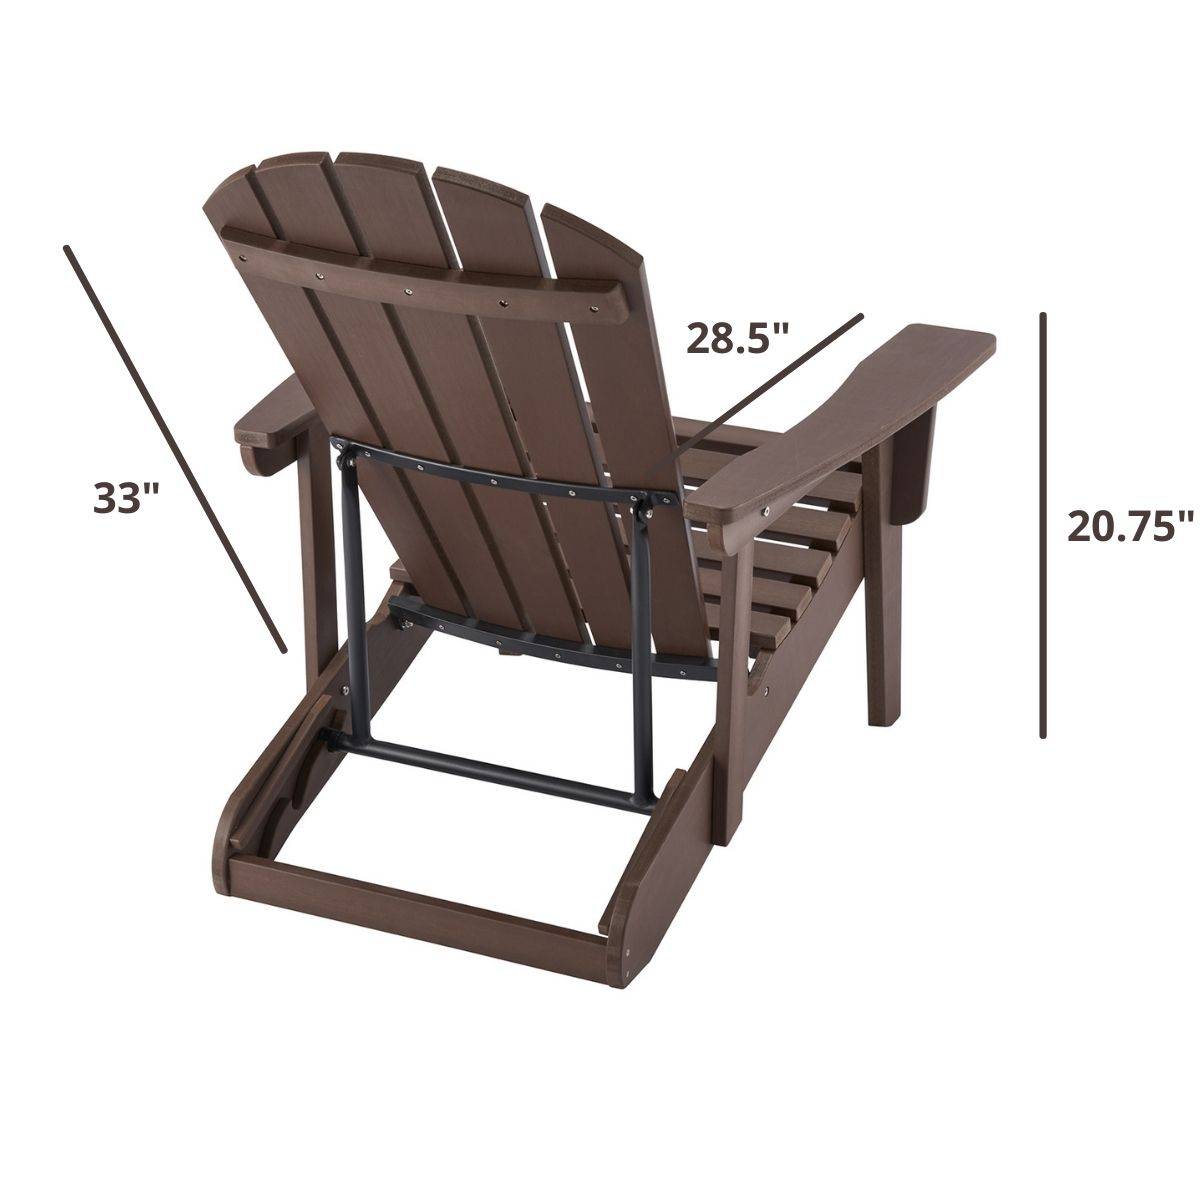 33 inches height backrest, 28.5 inches long armrest, 20.75 inches height from floor to top of armest